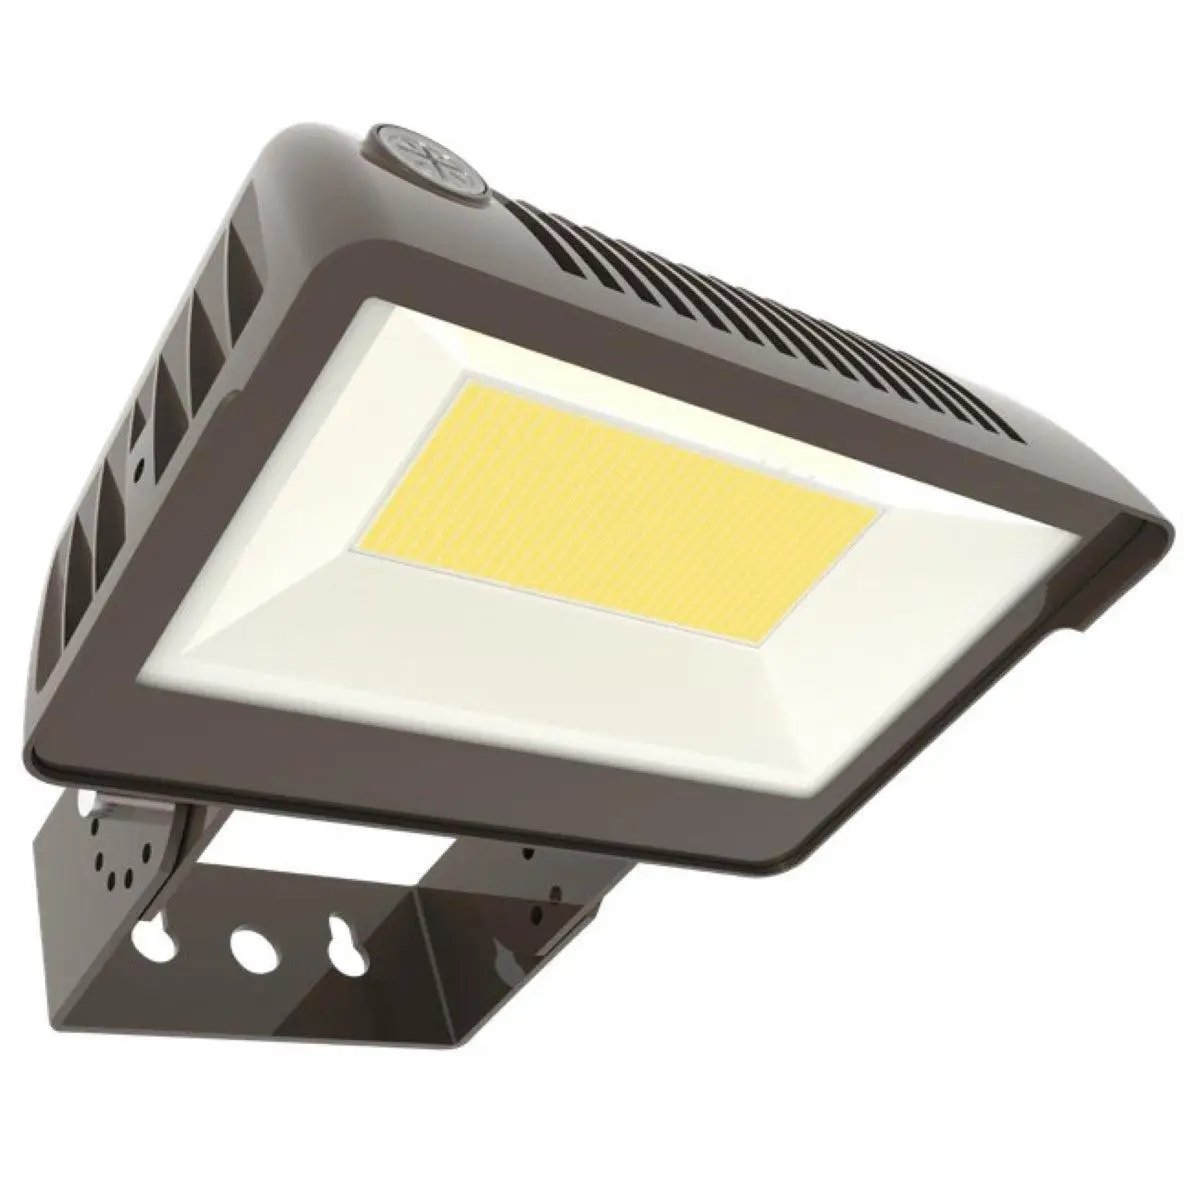 Outside Flood Light with color adjustable white light, universal mounting options, and built-in photocell for energy savings. 14300 lumens, 100W LED, 3000K-5000K color temperature. UL Listed, IP65 Rated, DLC Premium Listed. Slip Fitter and Trunnion mount. 10.55"W x 3.38"D x 7.05"H. 5-year warranty.